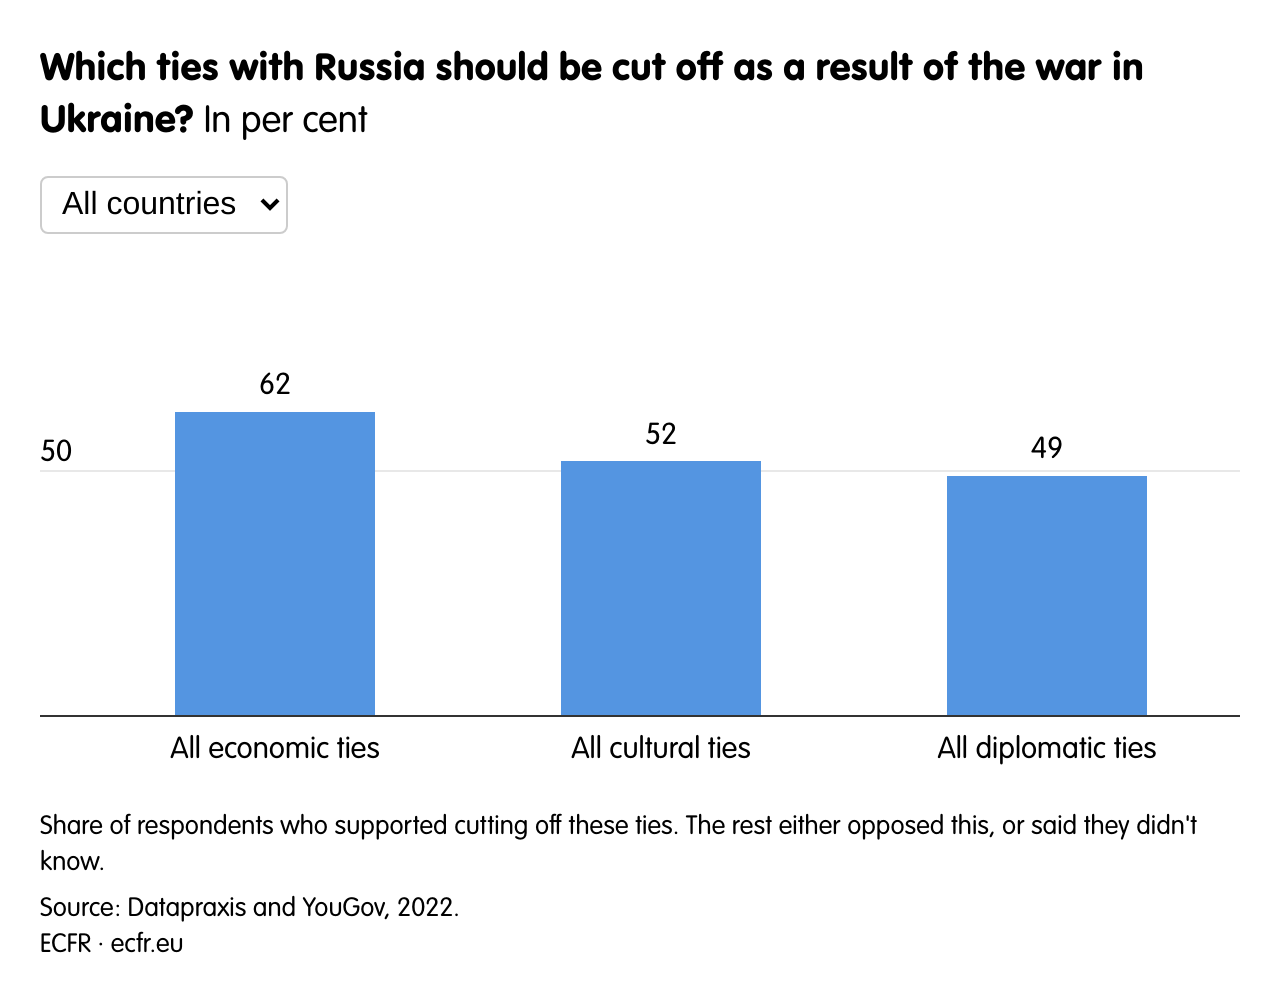 Which ties with Russia should be cut off as a result of the war in Ukraine?